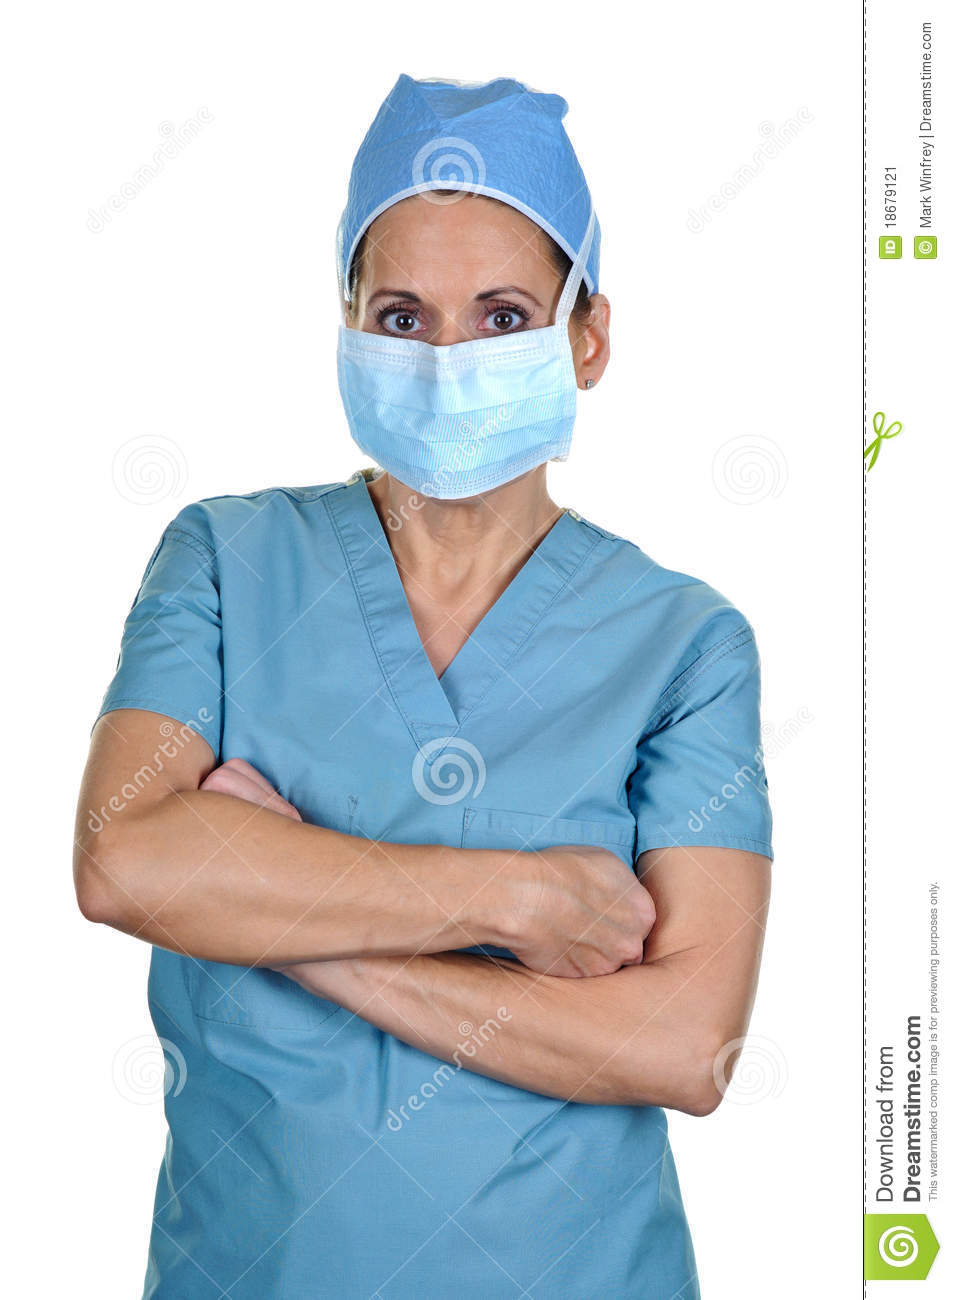 An Attractive Female Surgeon Wearing Surgical Mask And Hat